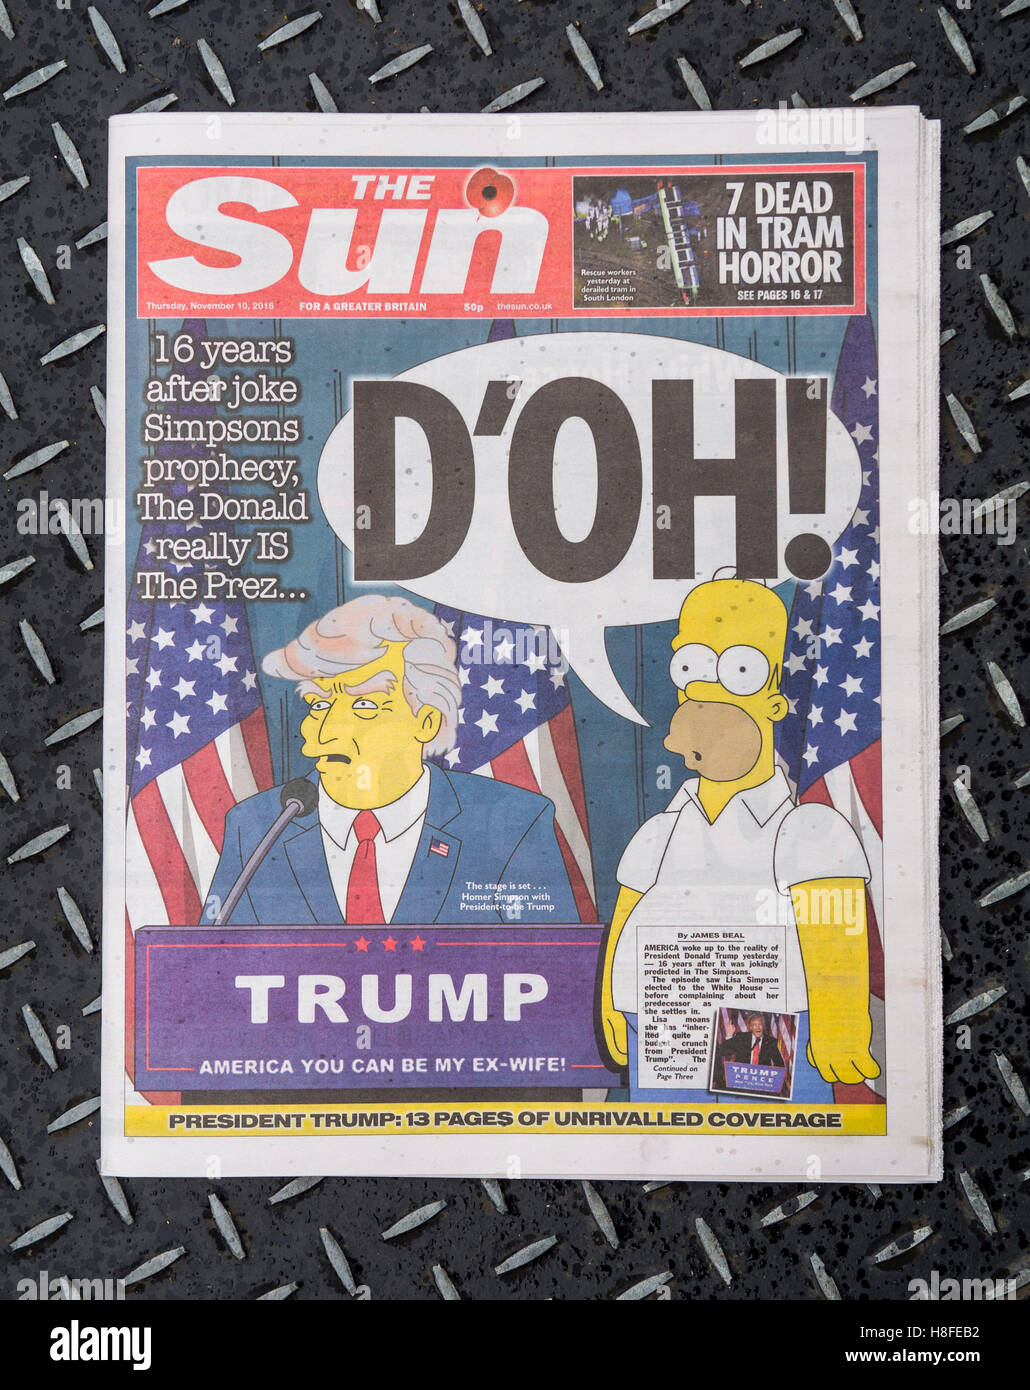 The Sun newspaper front page reporting on the US presidential election result in which Donald Trump became the 45th President of the United States. Stock Photo